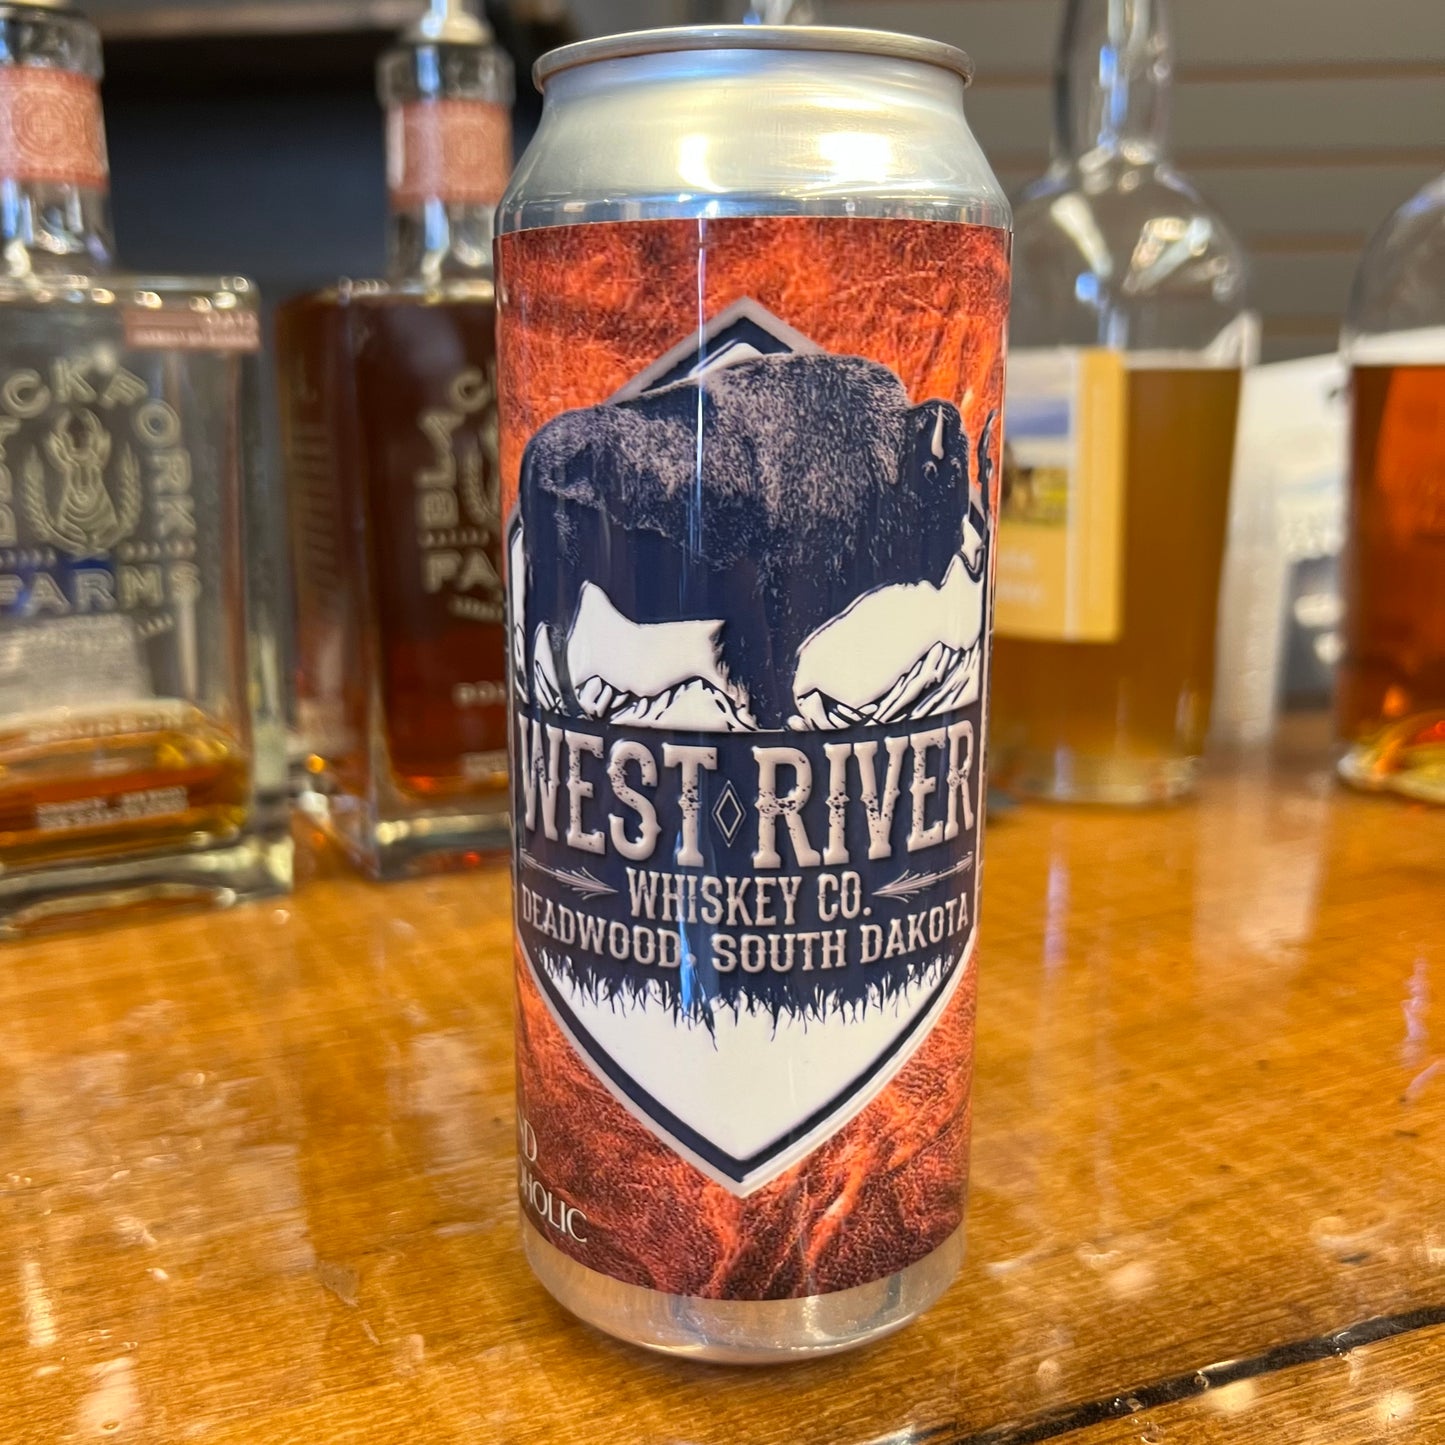 West River Whiskey Coffee